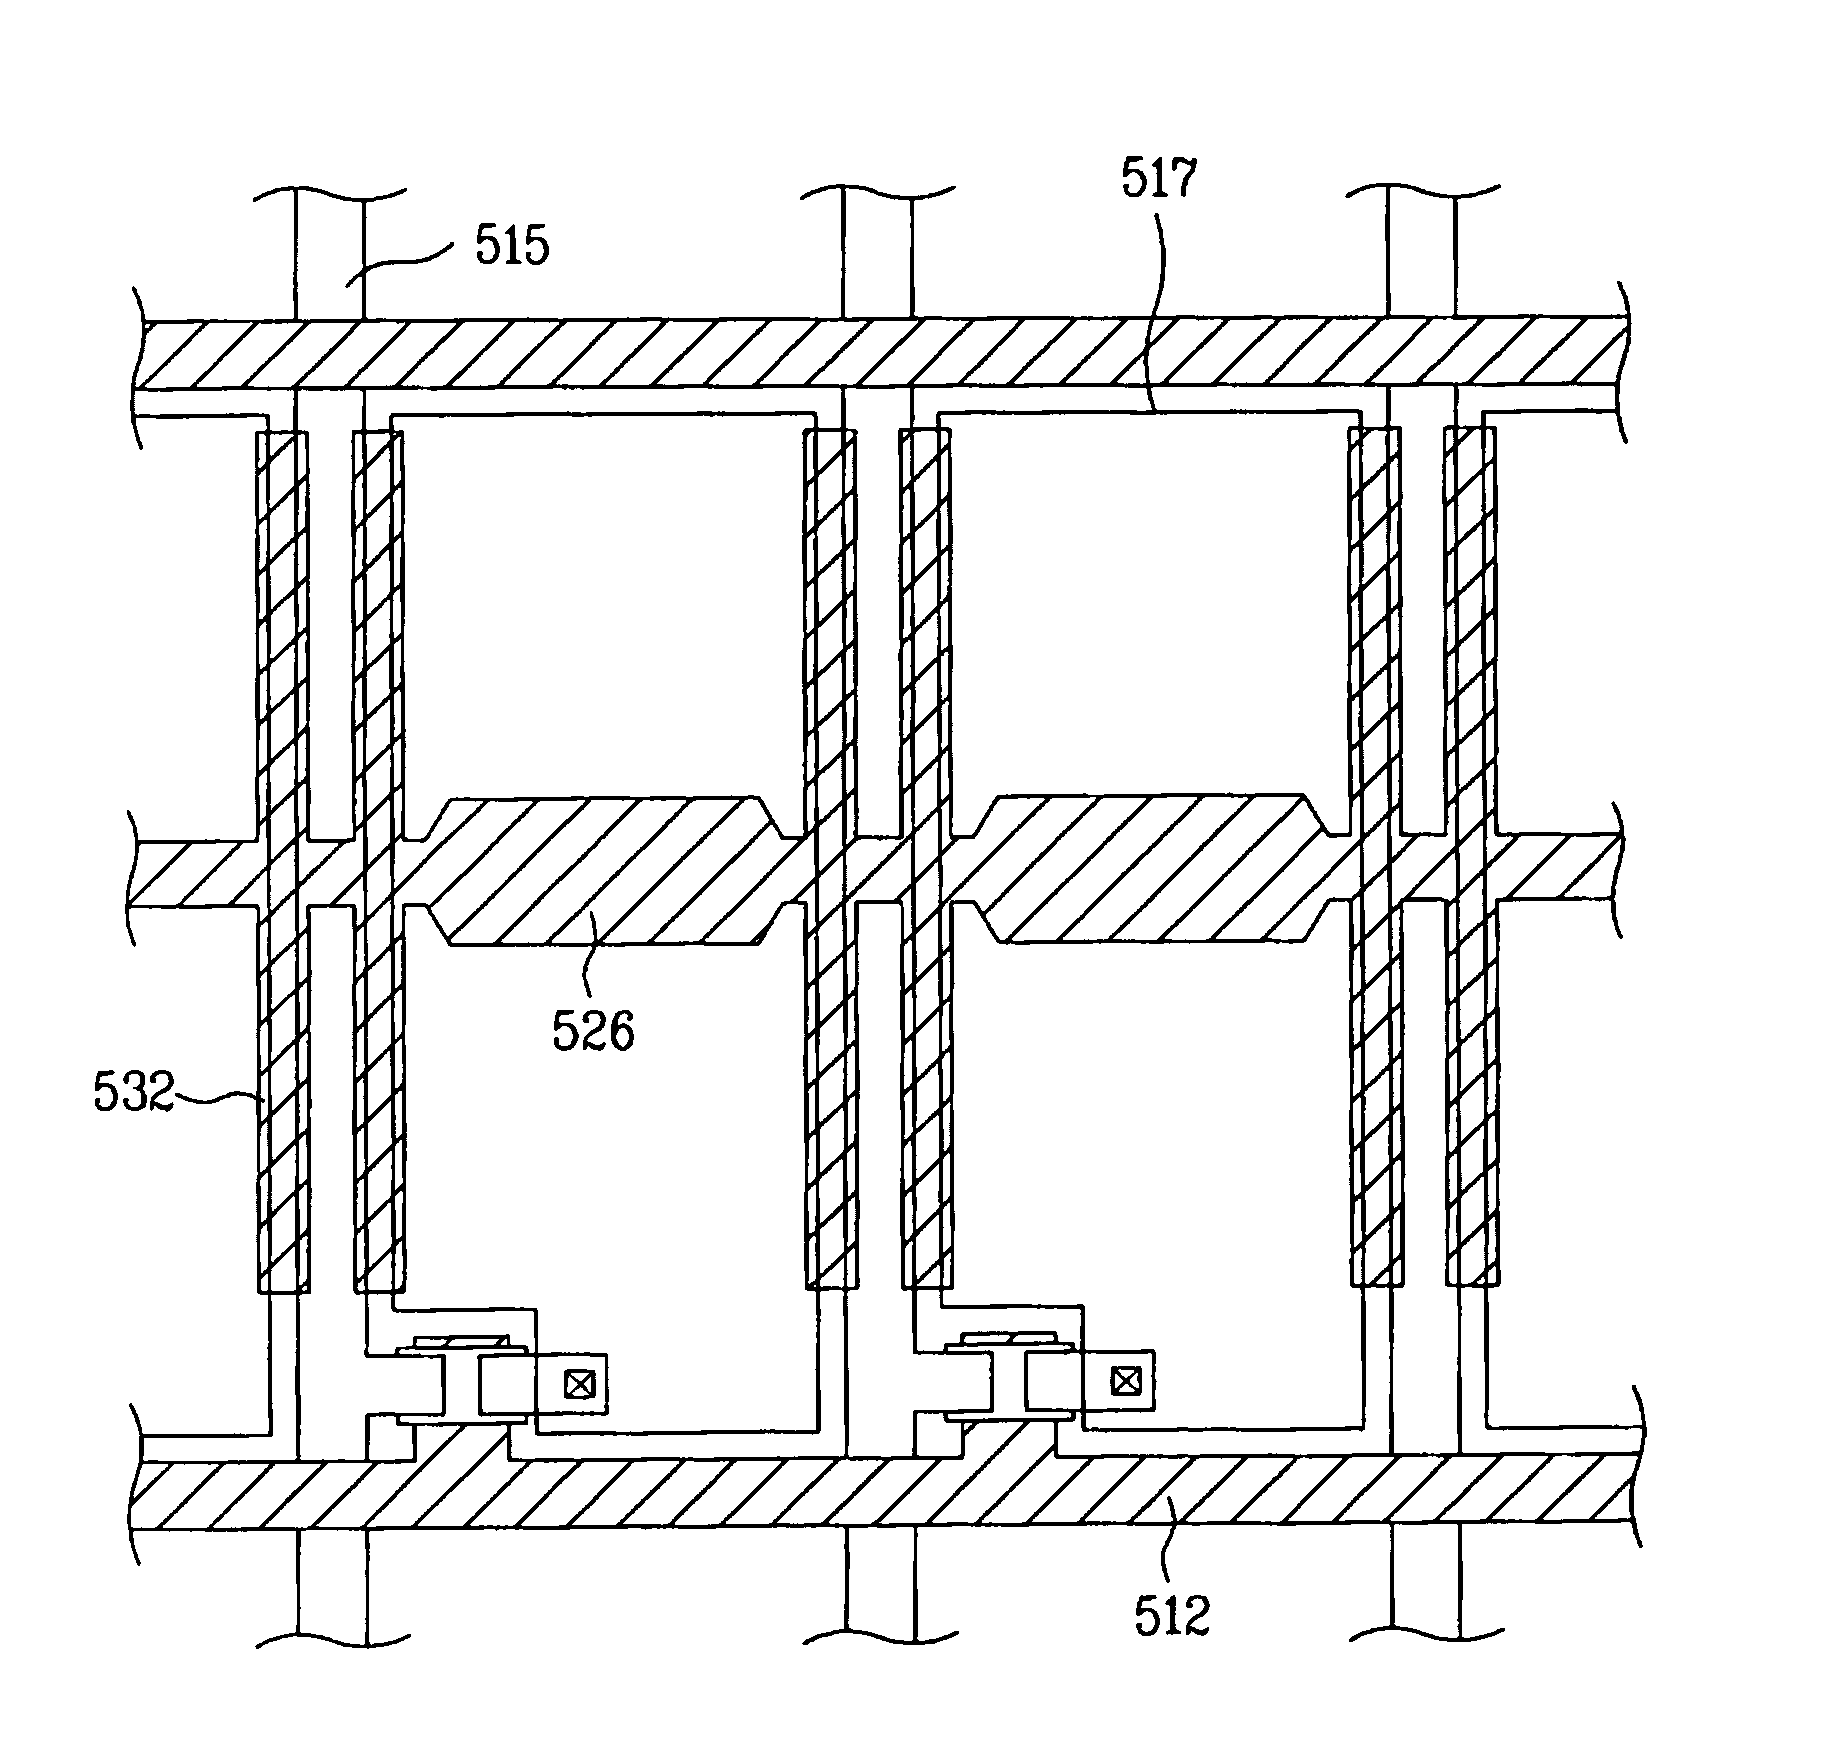 Liquid crystal display device having common line parallel to and between gate line and pixel electrode with light shield projecting from common line parallel to data line and overlapping area between data line and pixel electrode